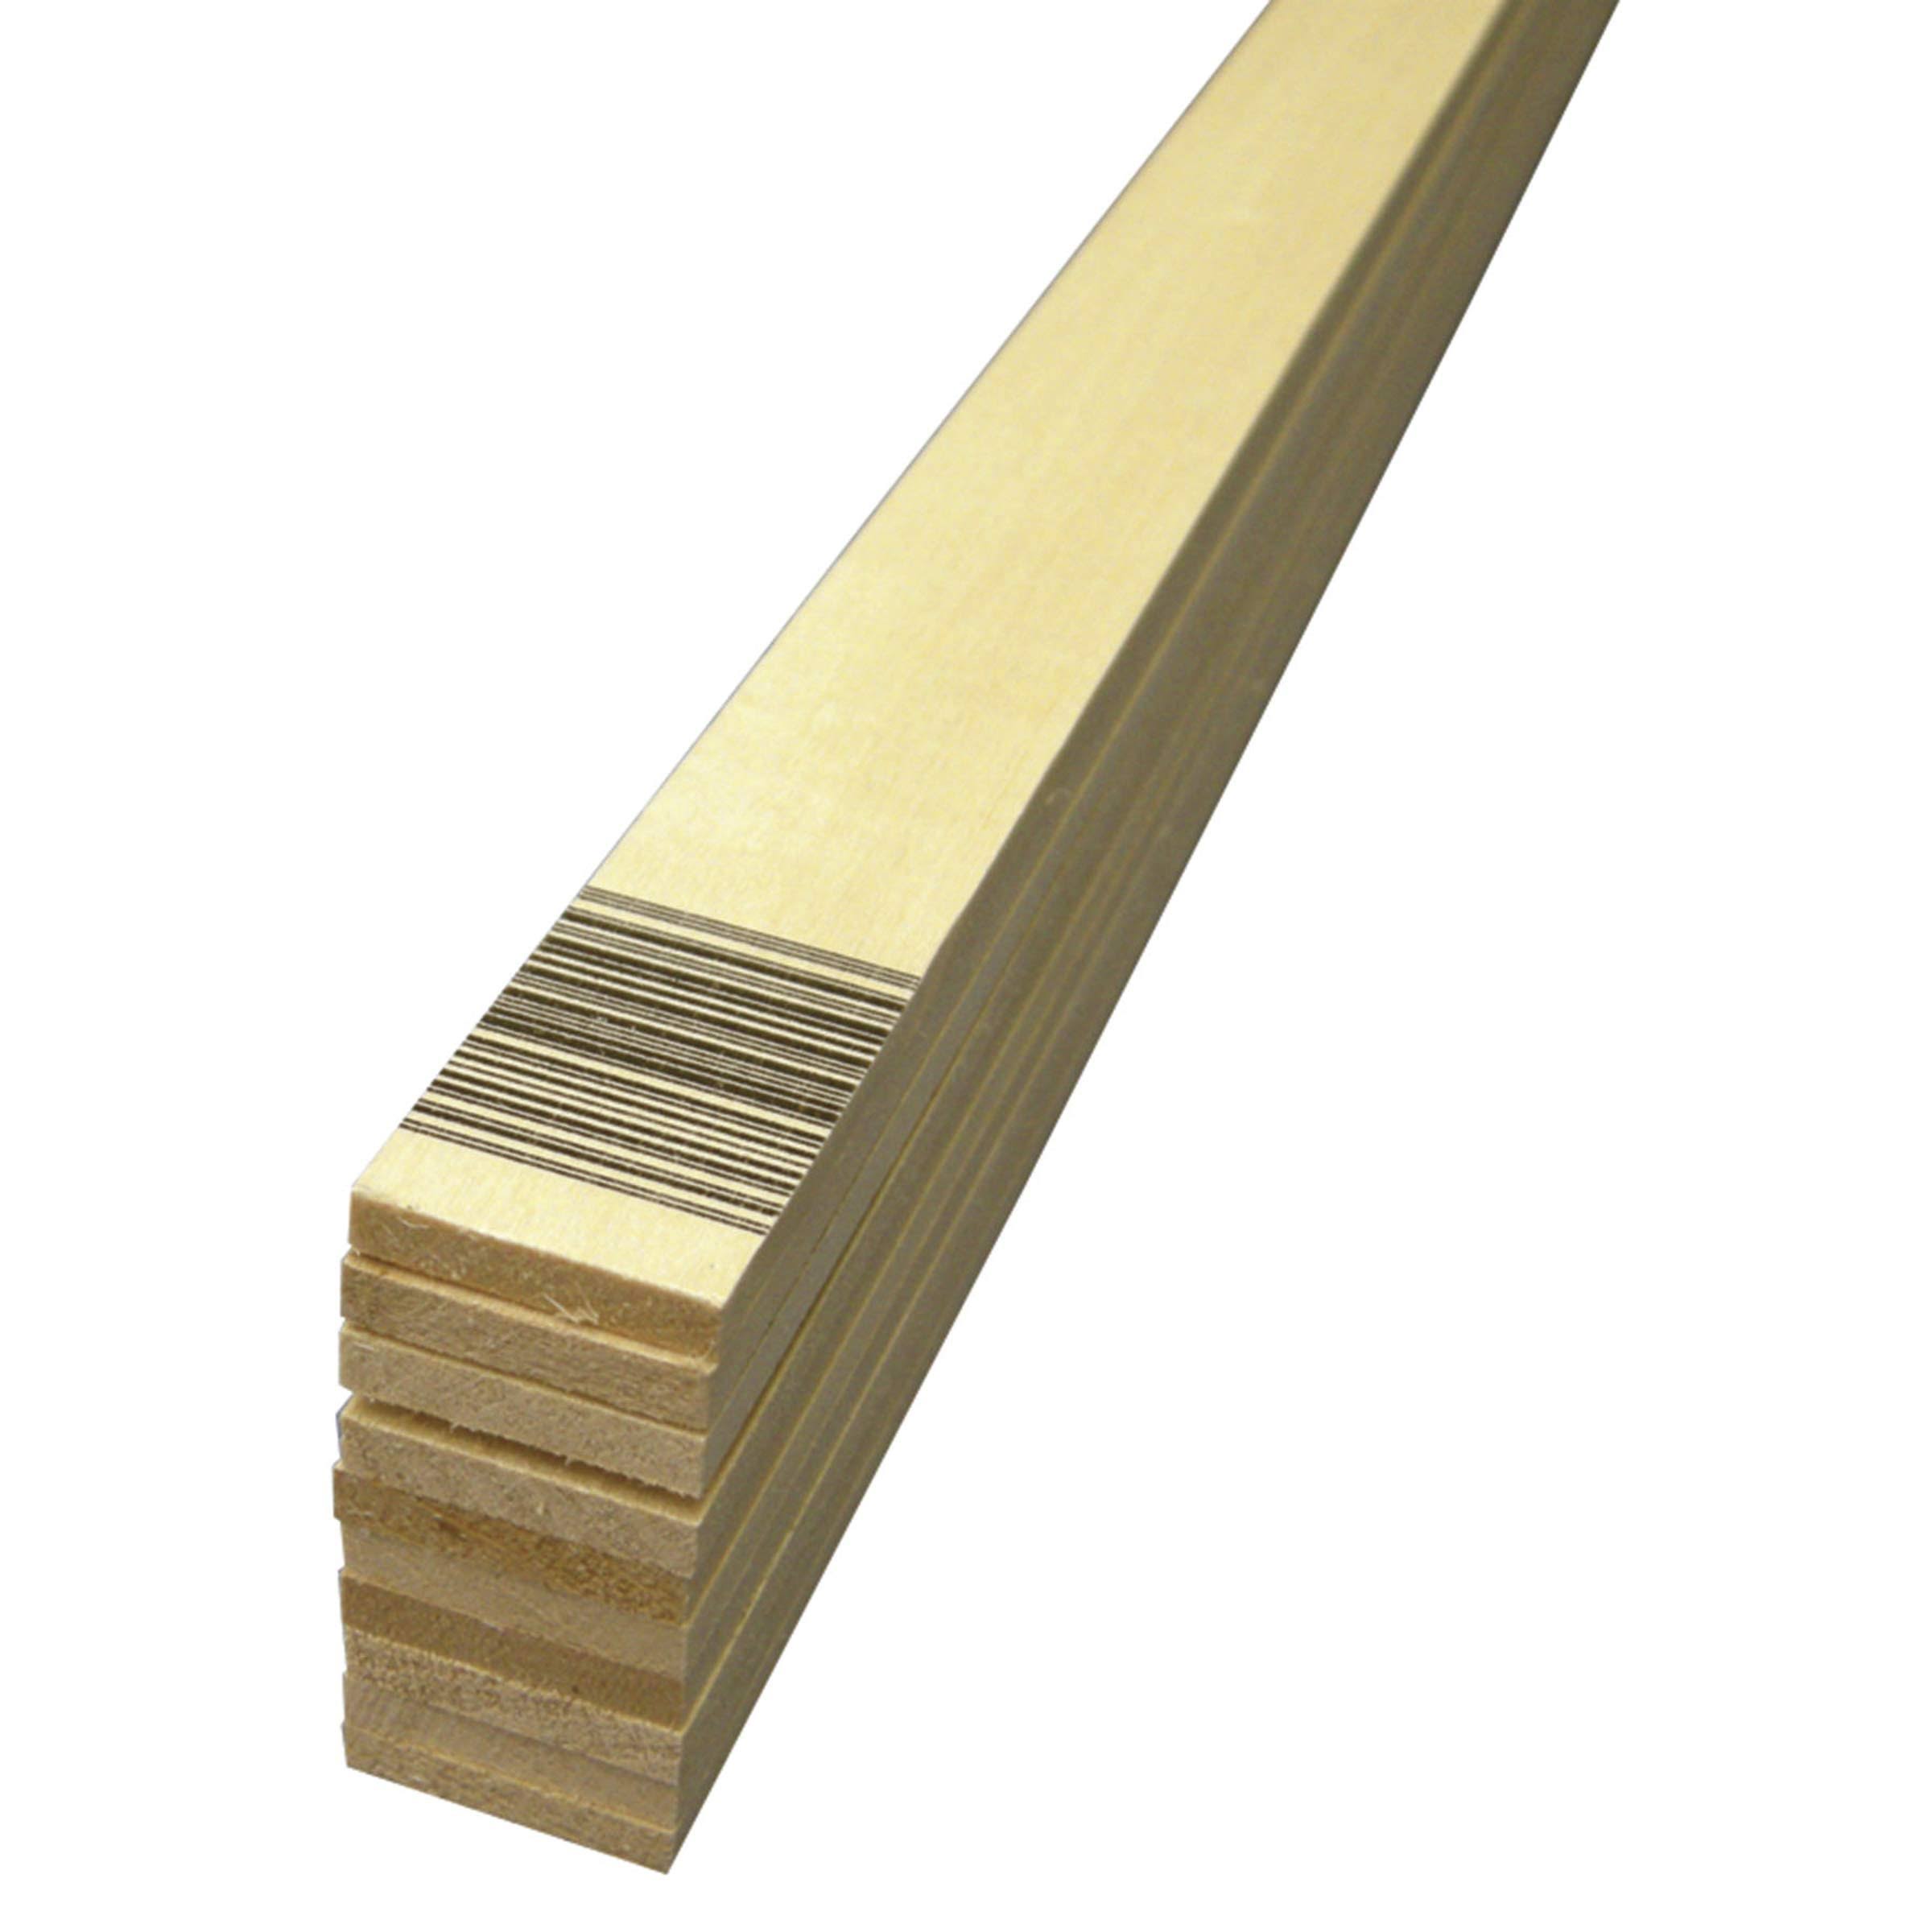 Midwest Basswood 3/16 x 1 x 24 (10) 4105